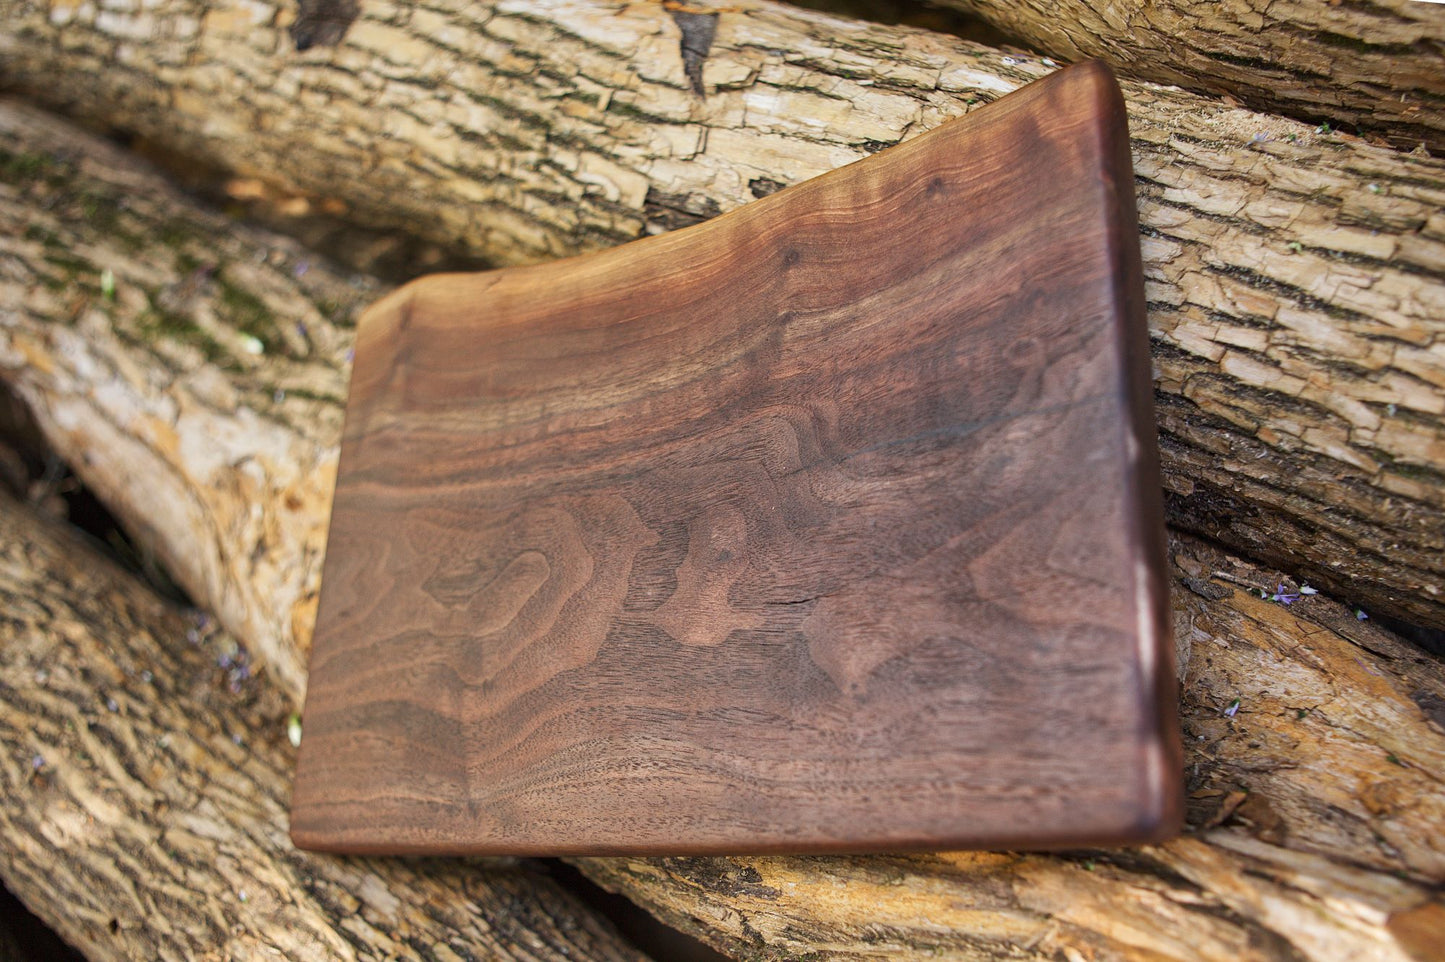 THE SHARK: Unique Live Edge Walnut Charcuterie Board - Rustic Elegance with a Wild Twist for Gourmet Display